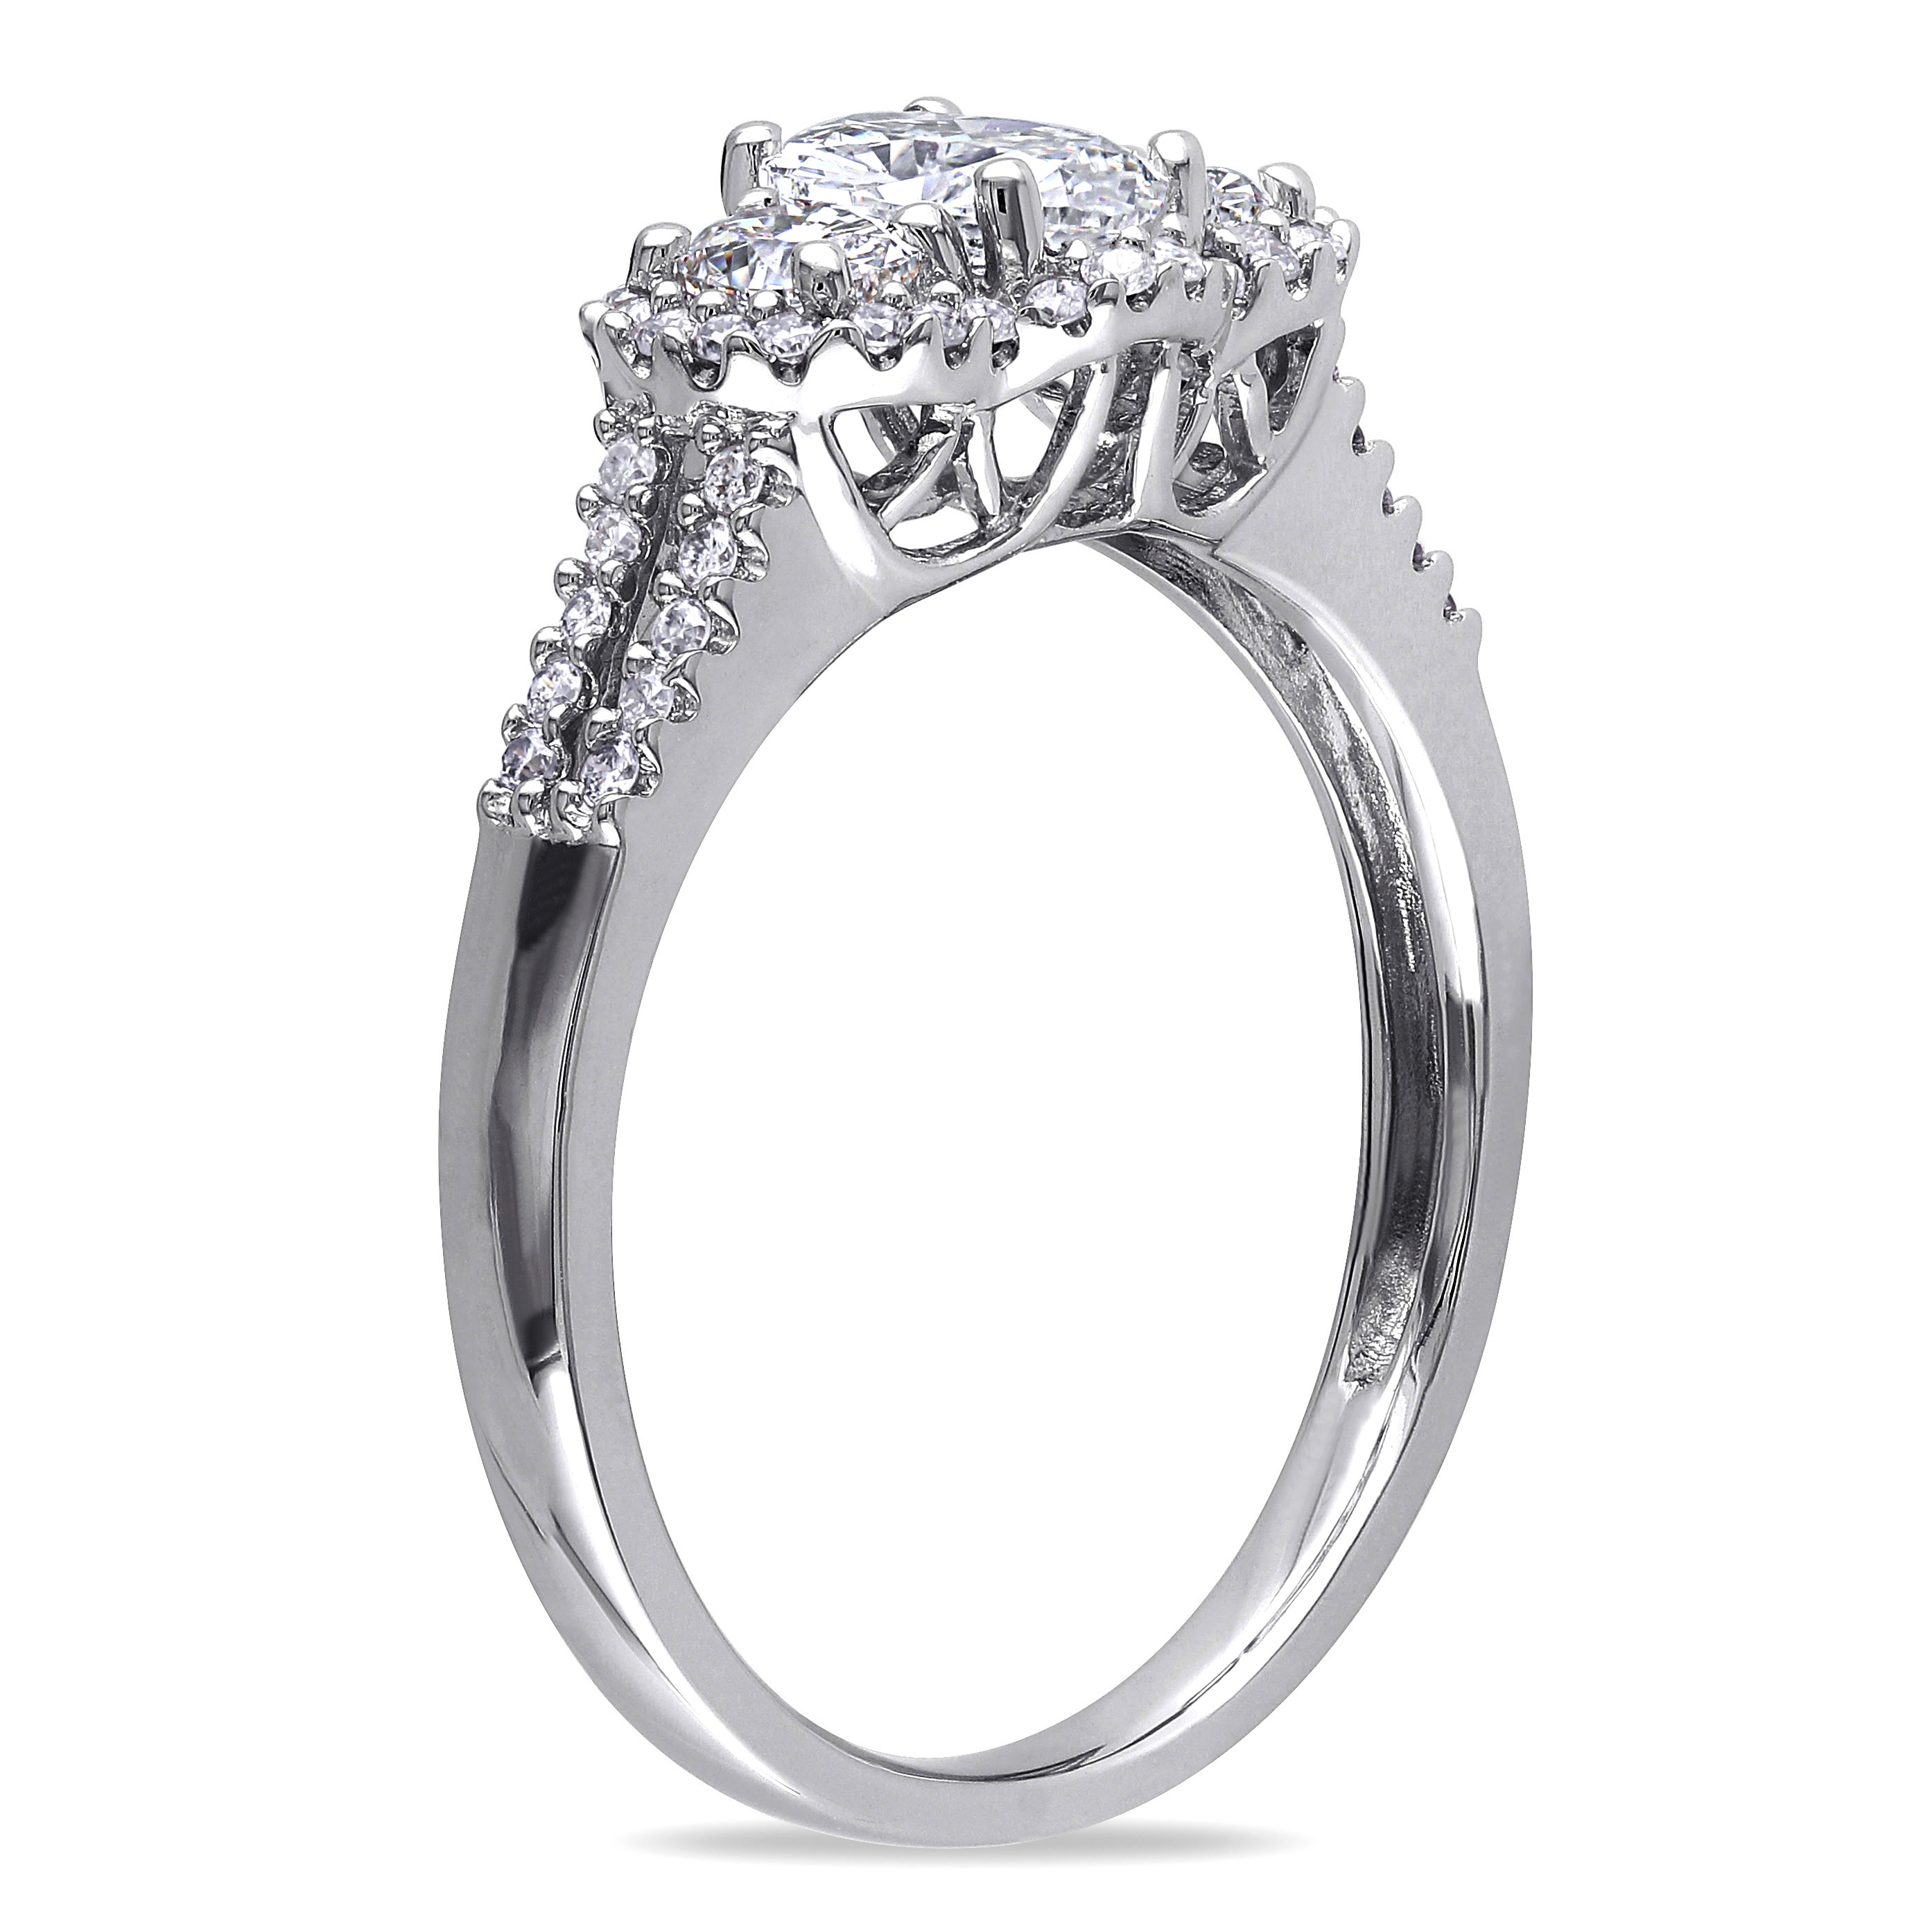 1 CT TW Oval 3-Stone Diamond Engagement Ring in 14k White Gold